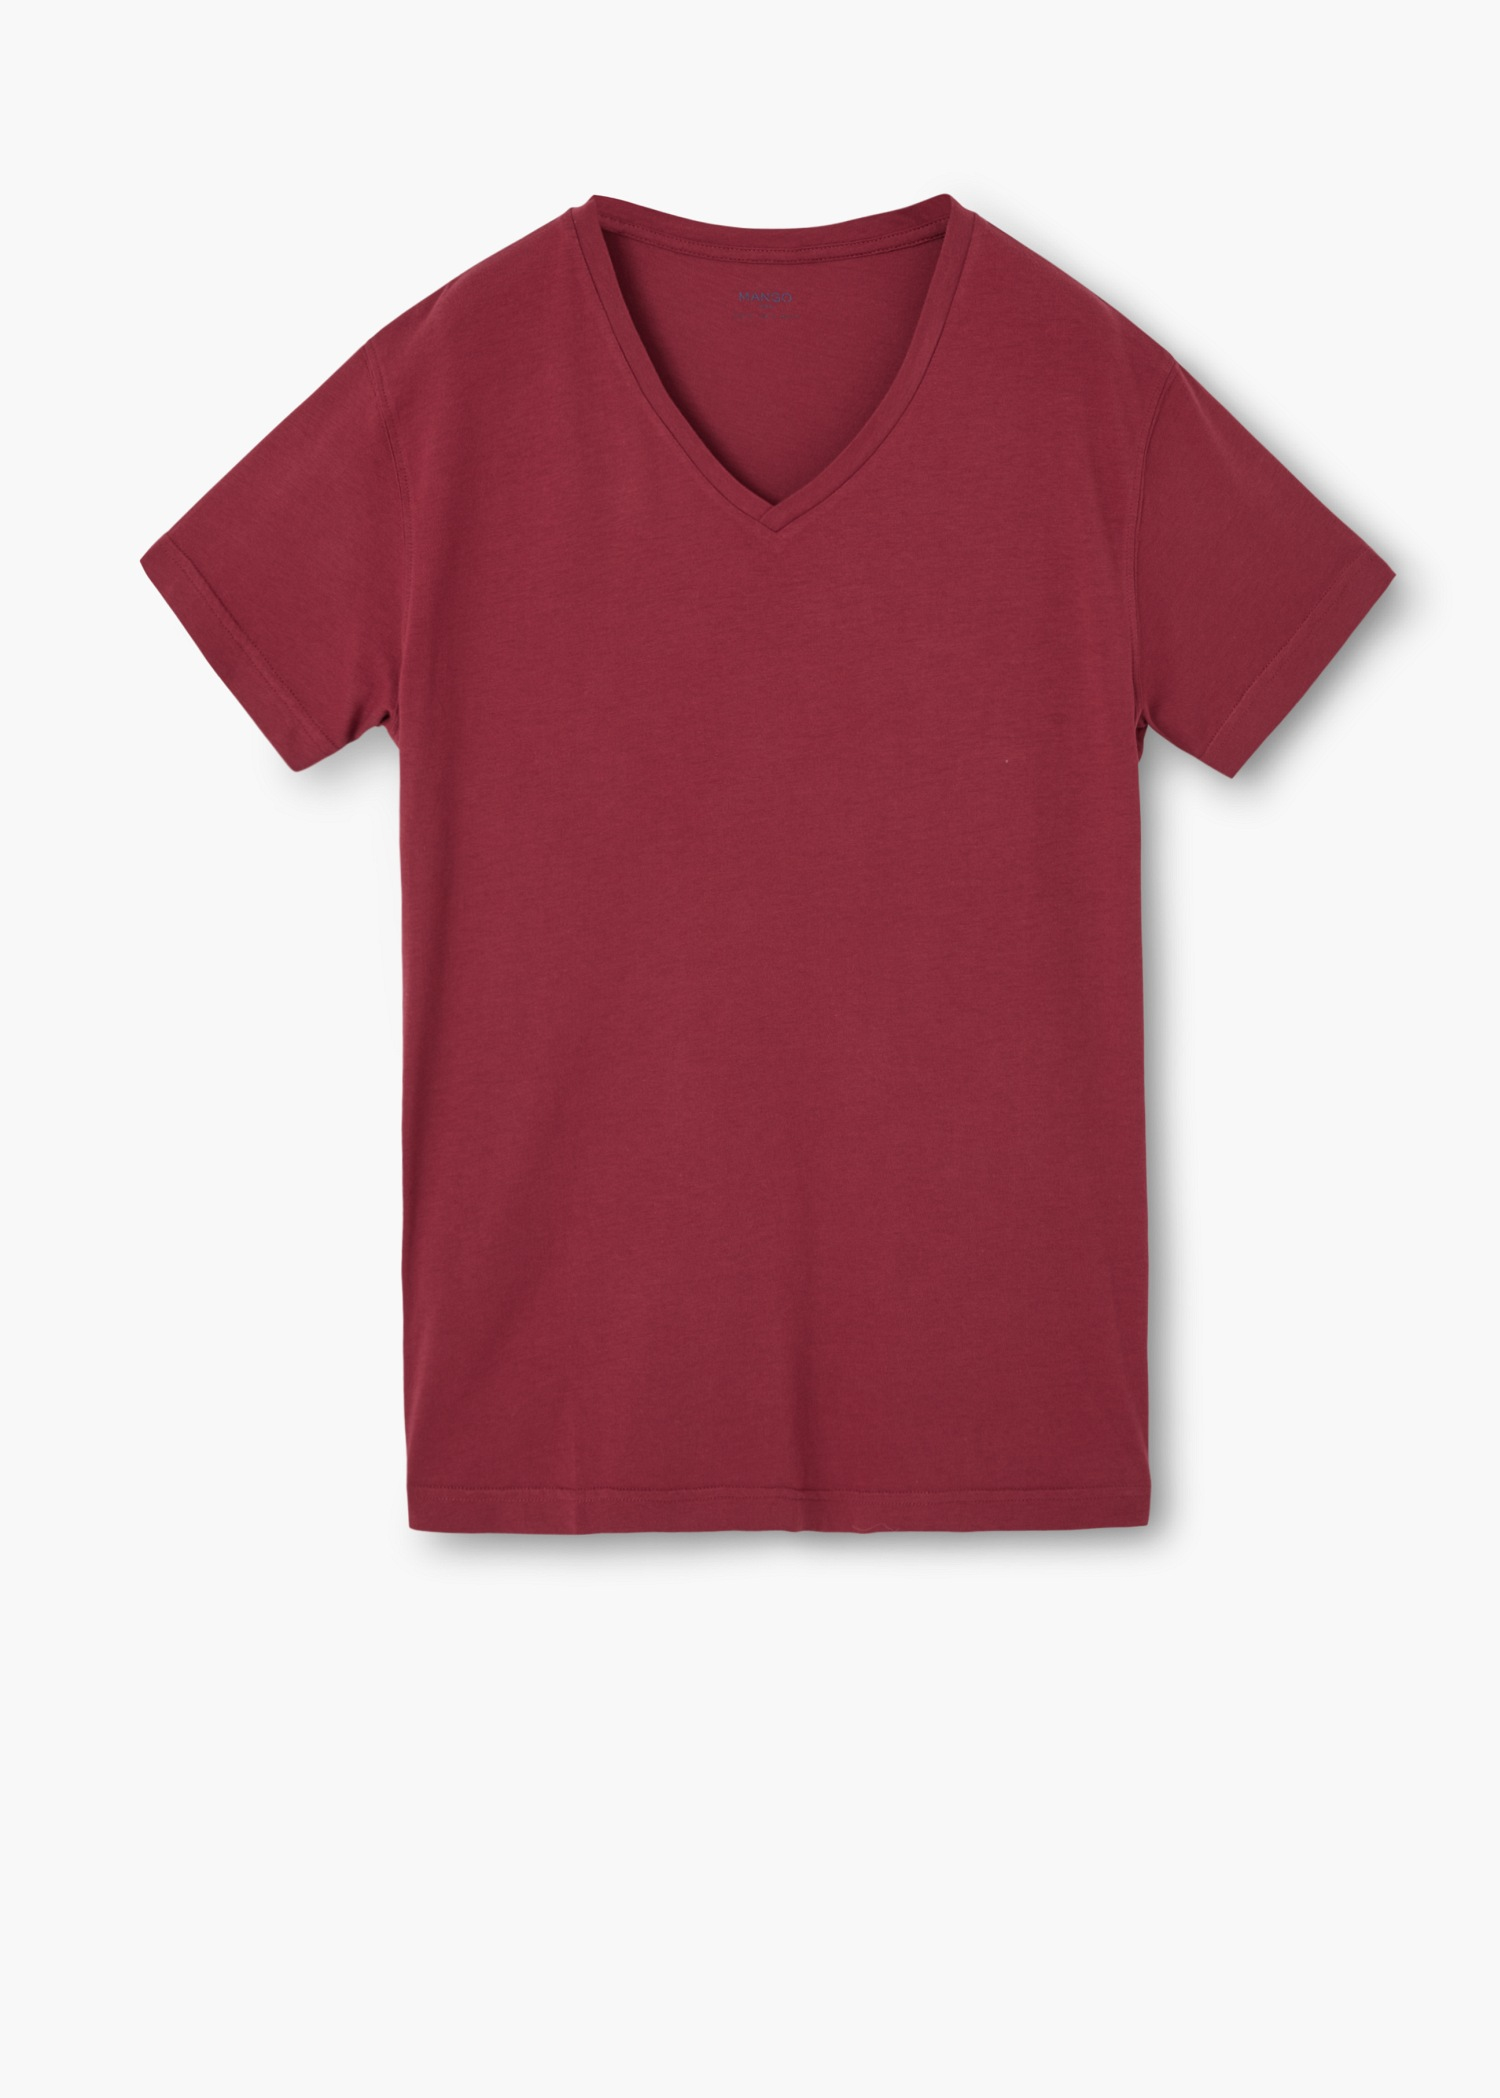 Lyst - Mango V-neck Cotton T-shirt in Red for Men